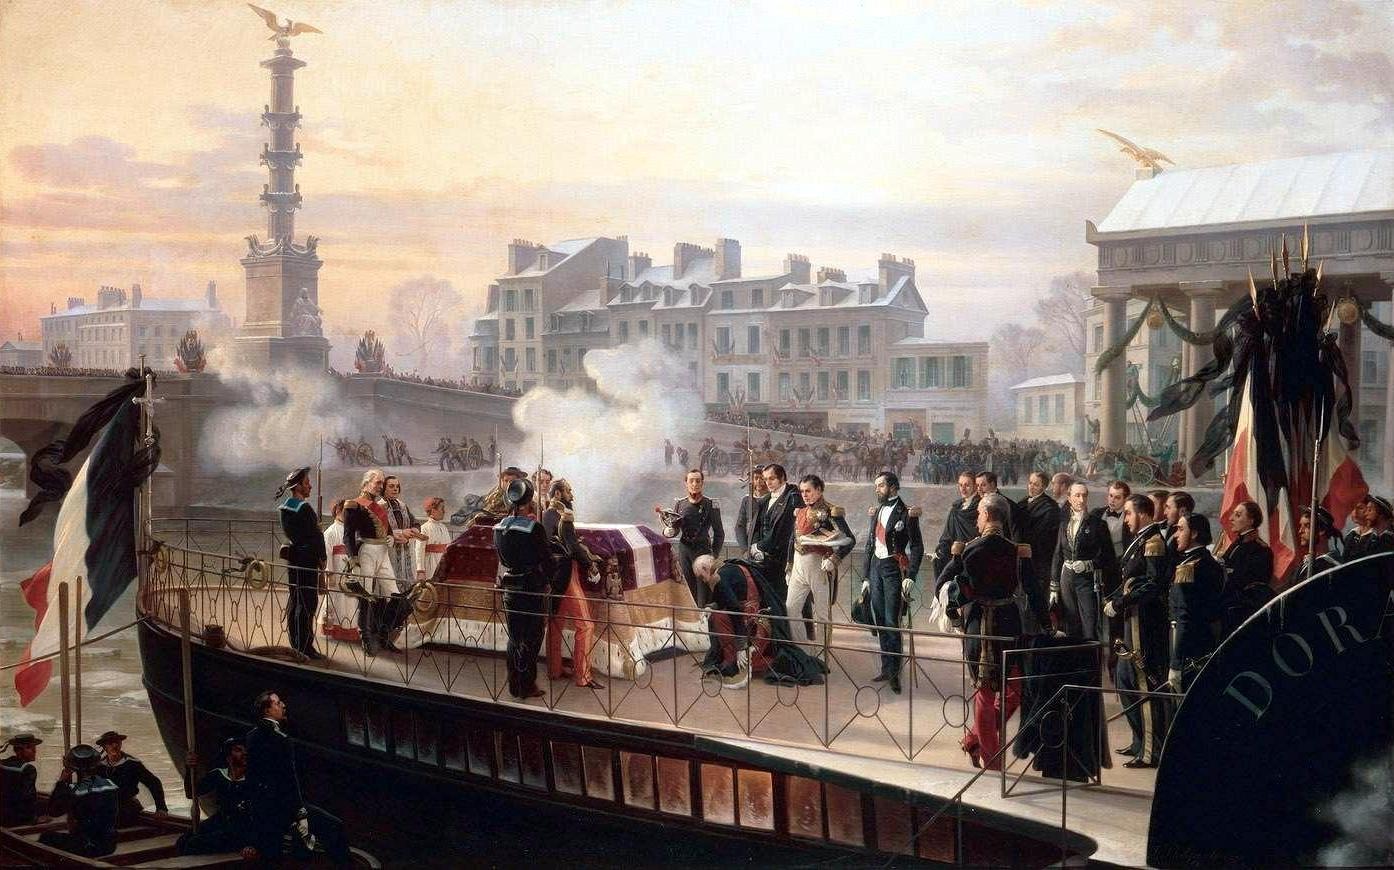 The arrival of the Dorade at Courbevoie on 14th December 1840. Painting by Félix Philippoteaux, 1867.